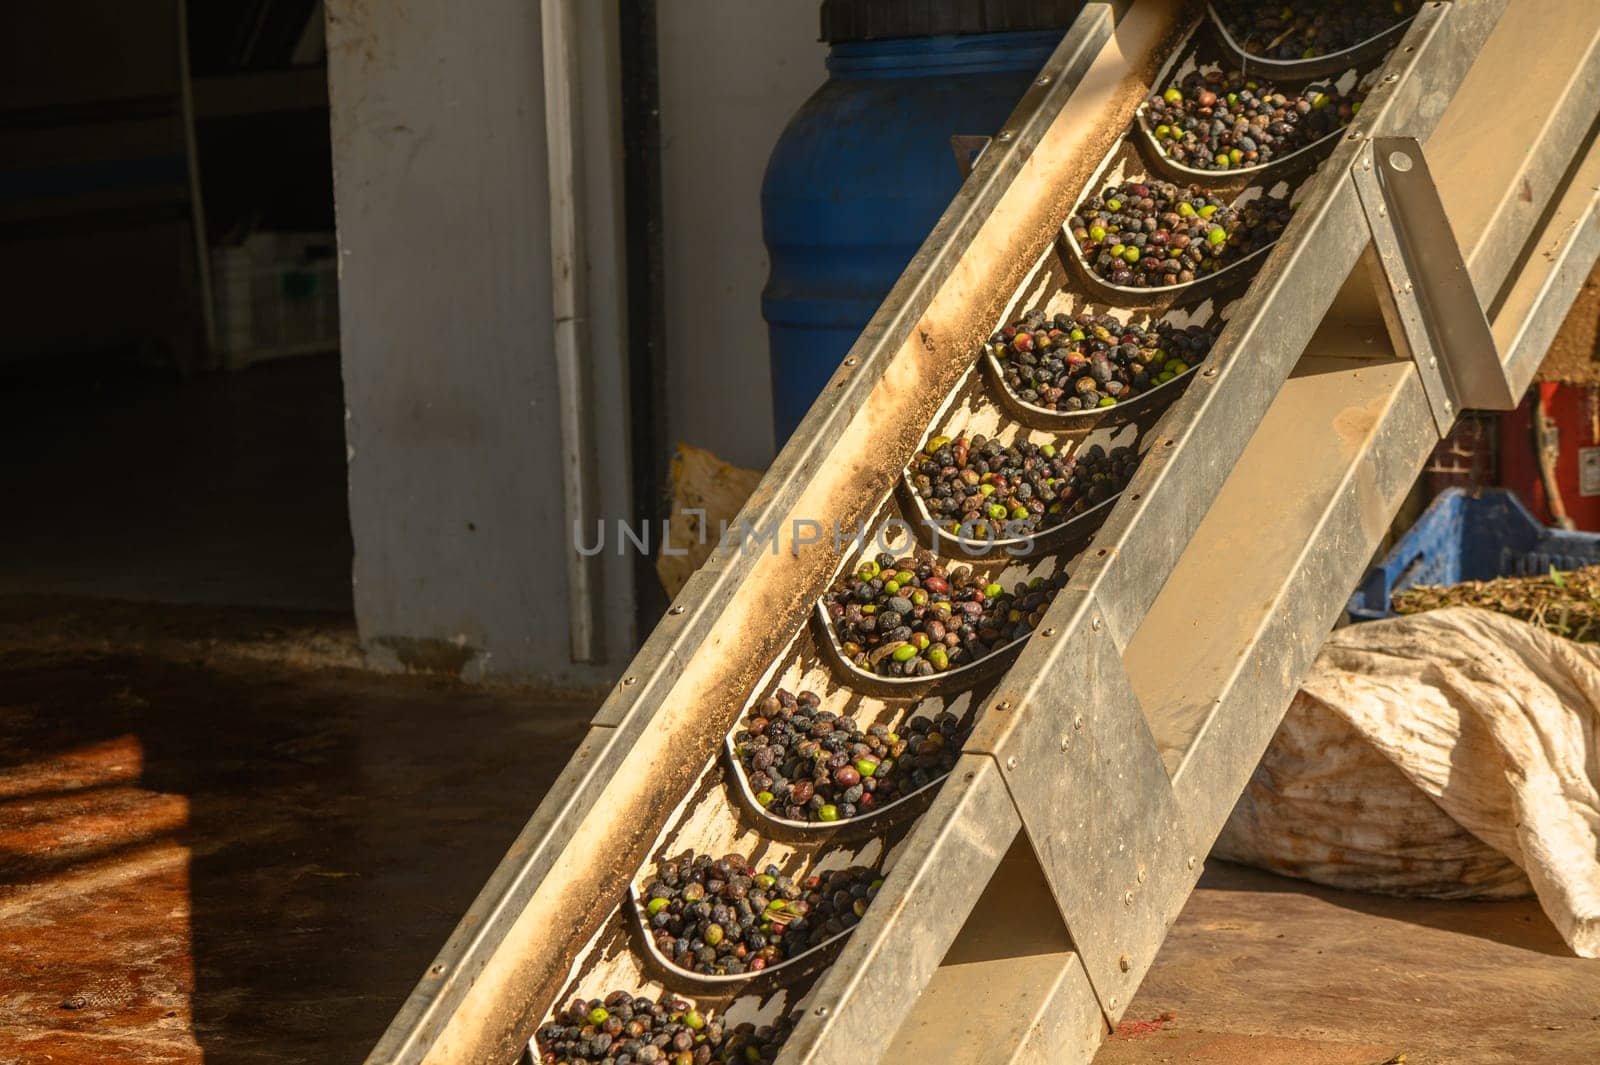 olives are transported from a bunker to an olive oil pressing plant 2 by Mixa74